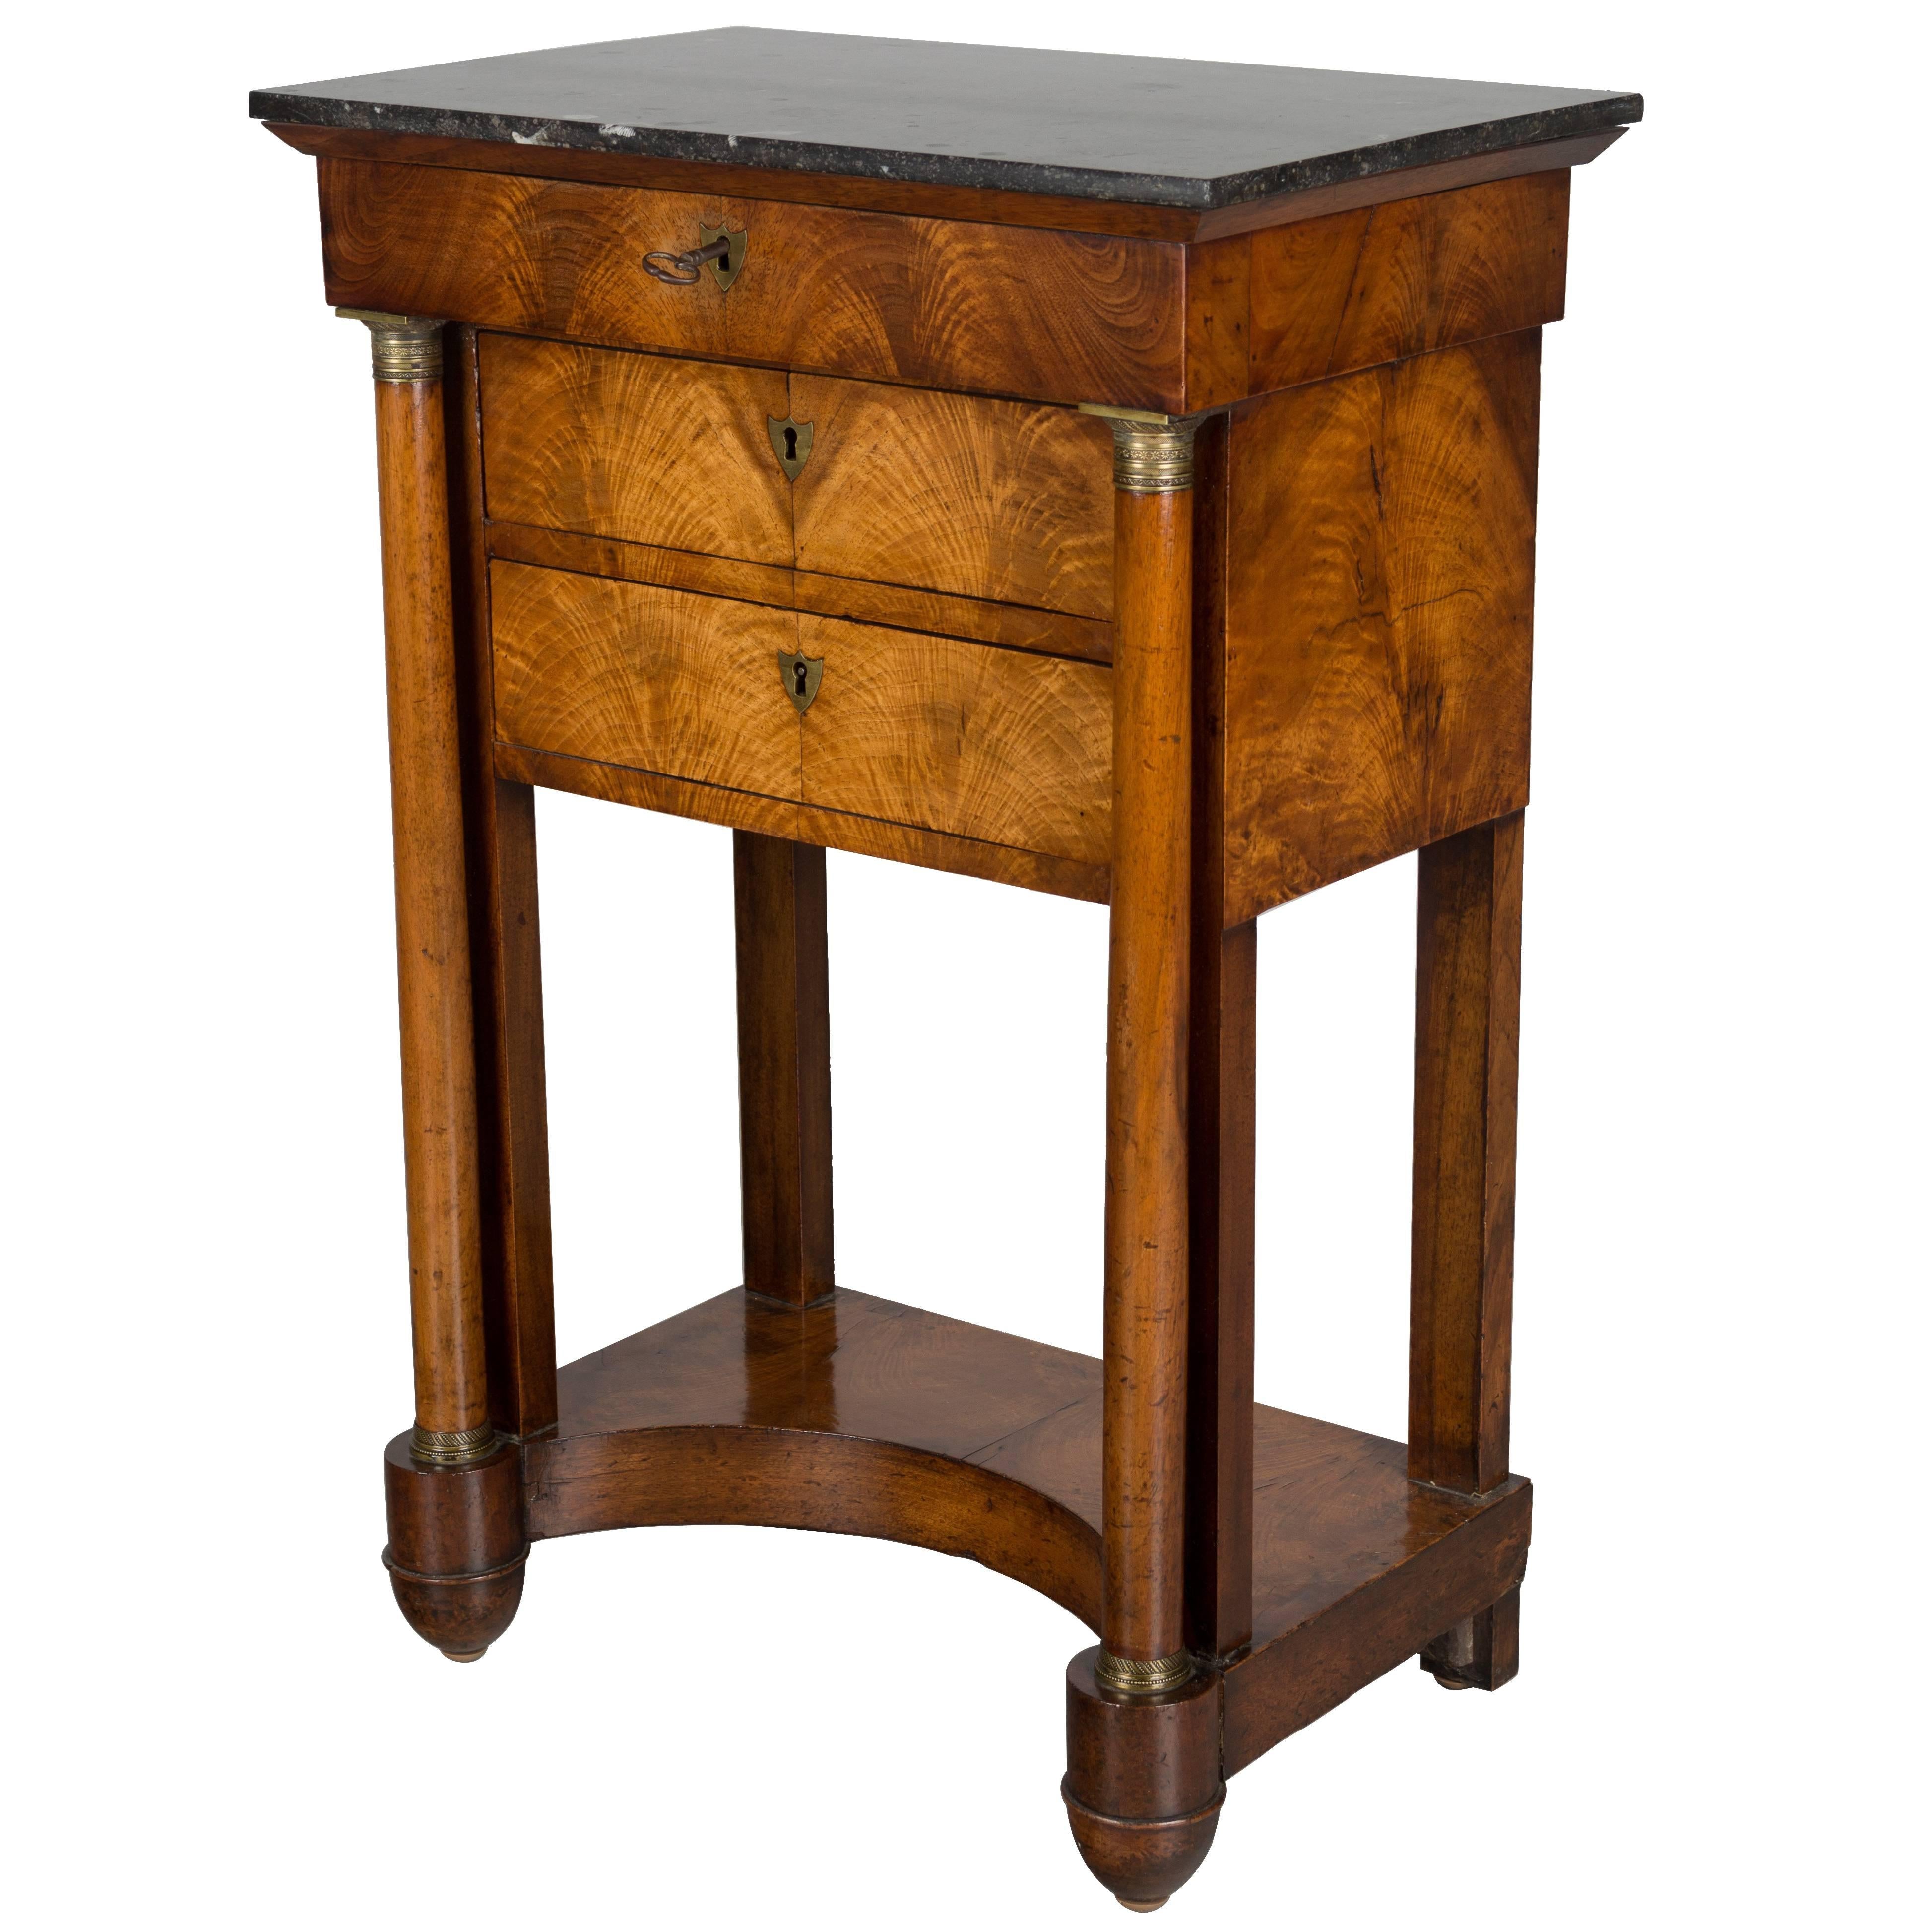 19th Century French Empire Period Walnut Table